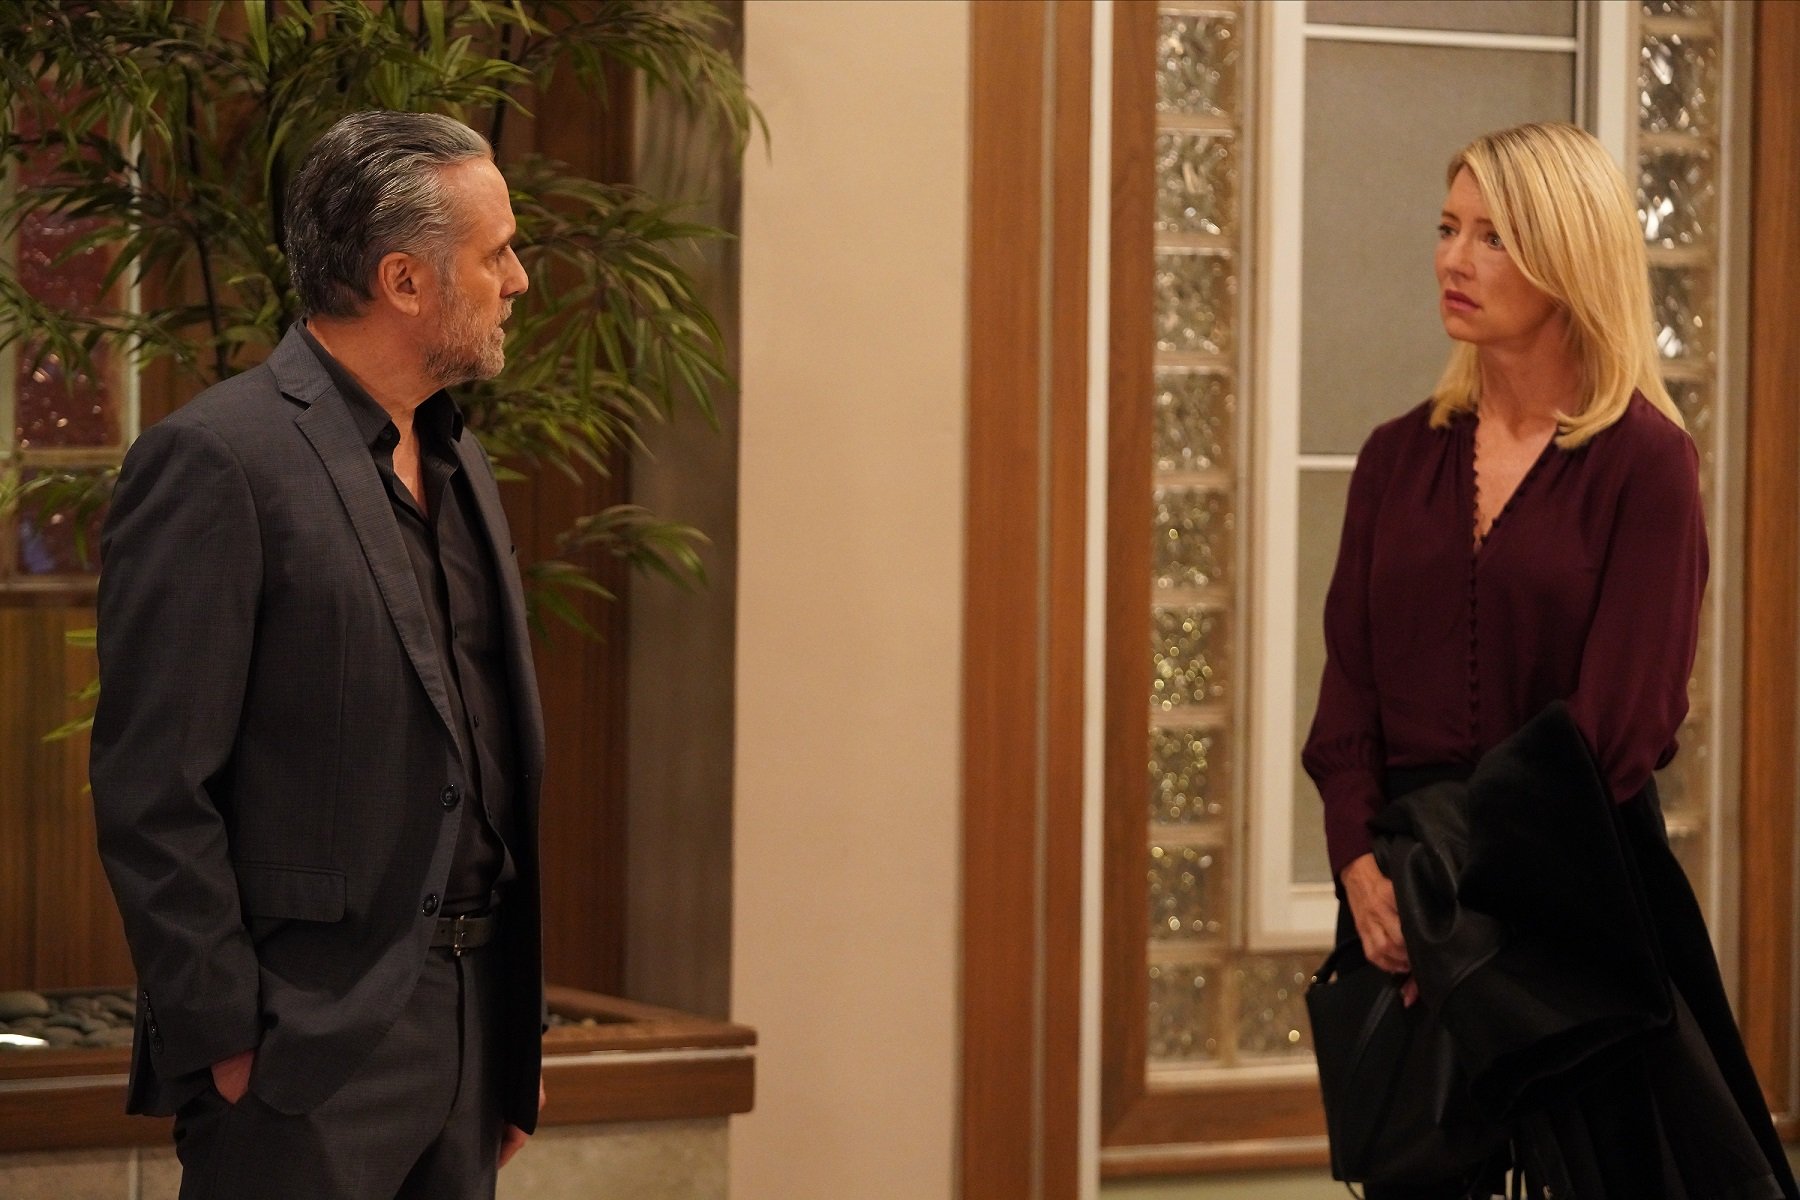 General Hospital sneak peek focuses on Sonny, pictured here in a grey suit, and Nina, pictured here in a red shirt and black pants